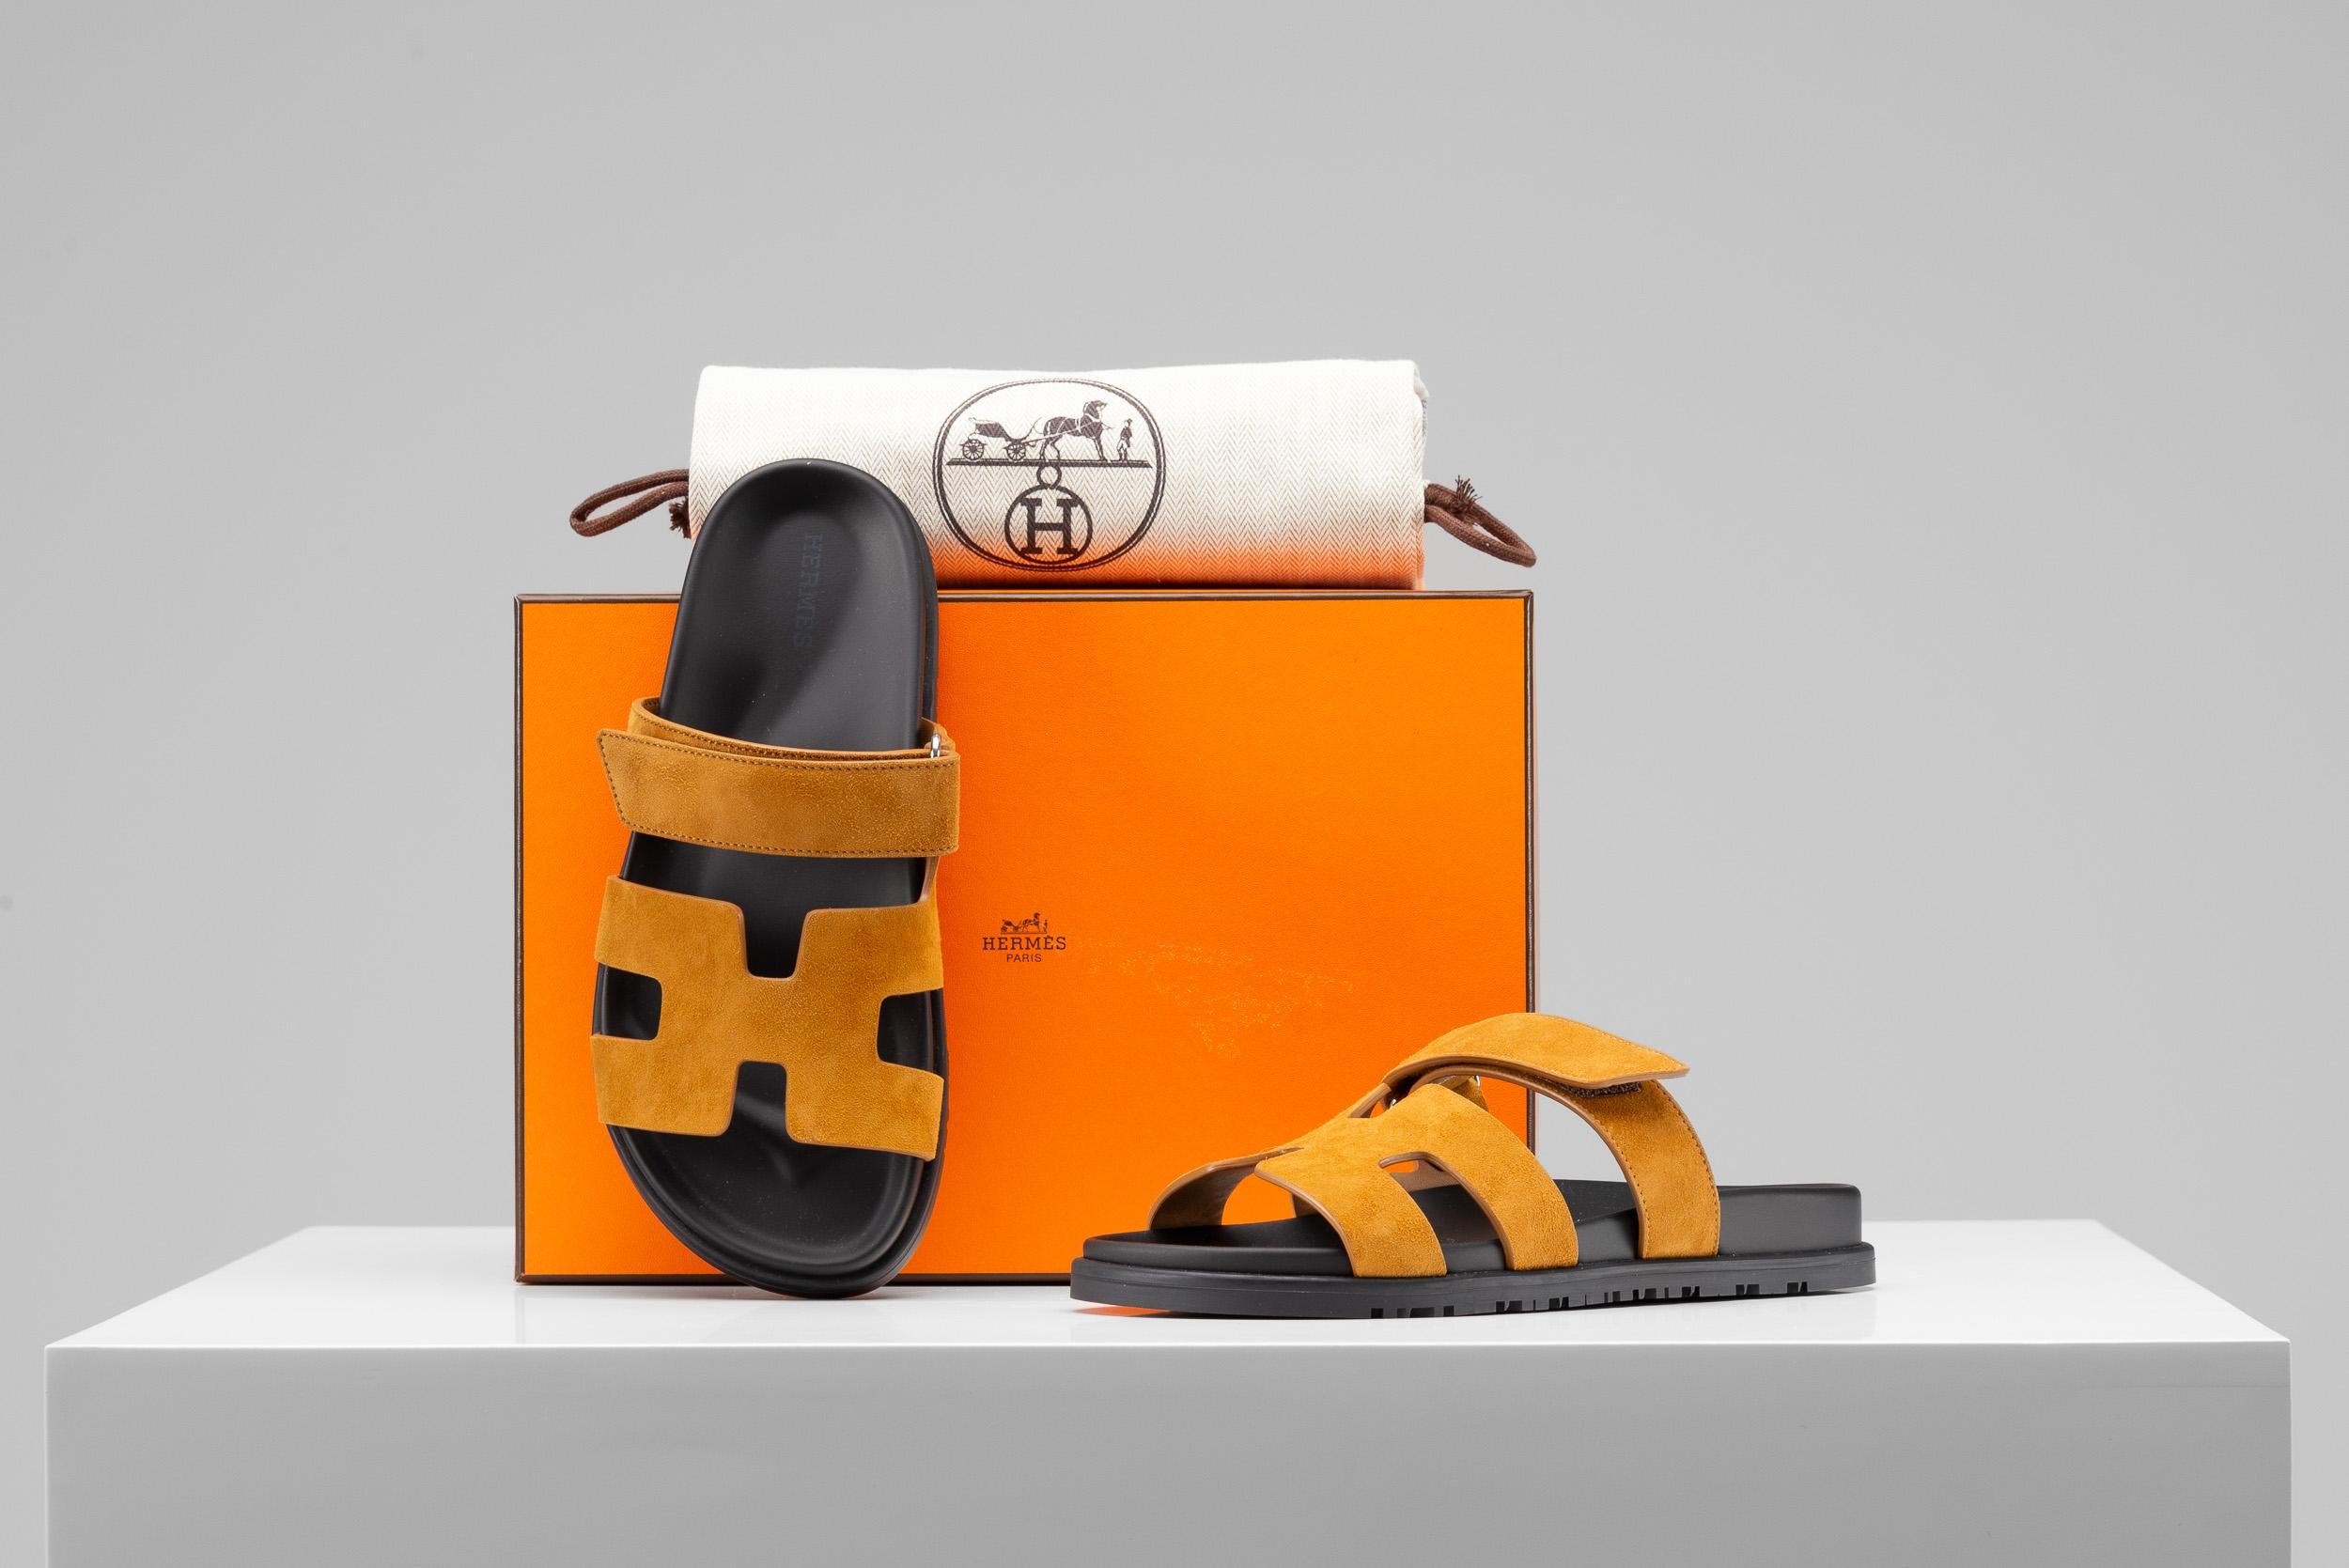 From the collection of SAVINETI we offer these new pair of Hermès Chypre Sandals:
- Brand: Hermes
- Model: Chypre Tan Sandals Suede
- Size: 37
- Year: 2023
- Condition: New, have never been used (Full-Set)
- Materials: calfskin, black rubber sole
-